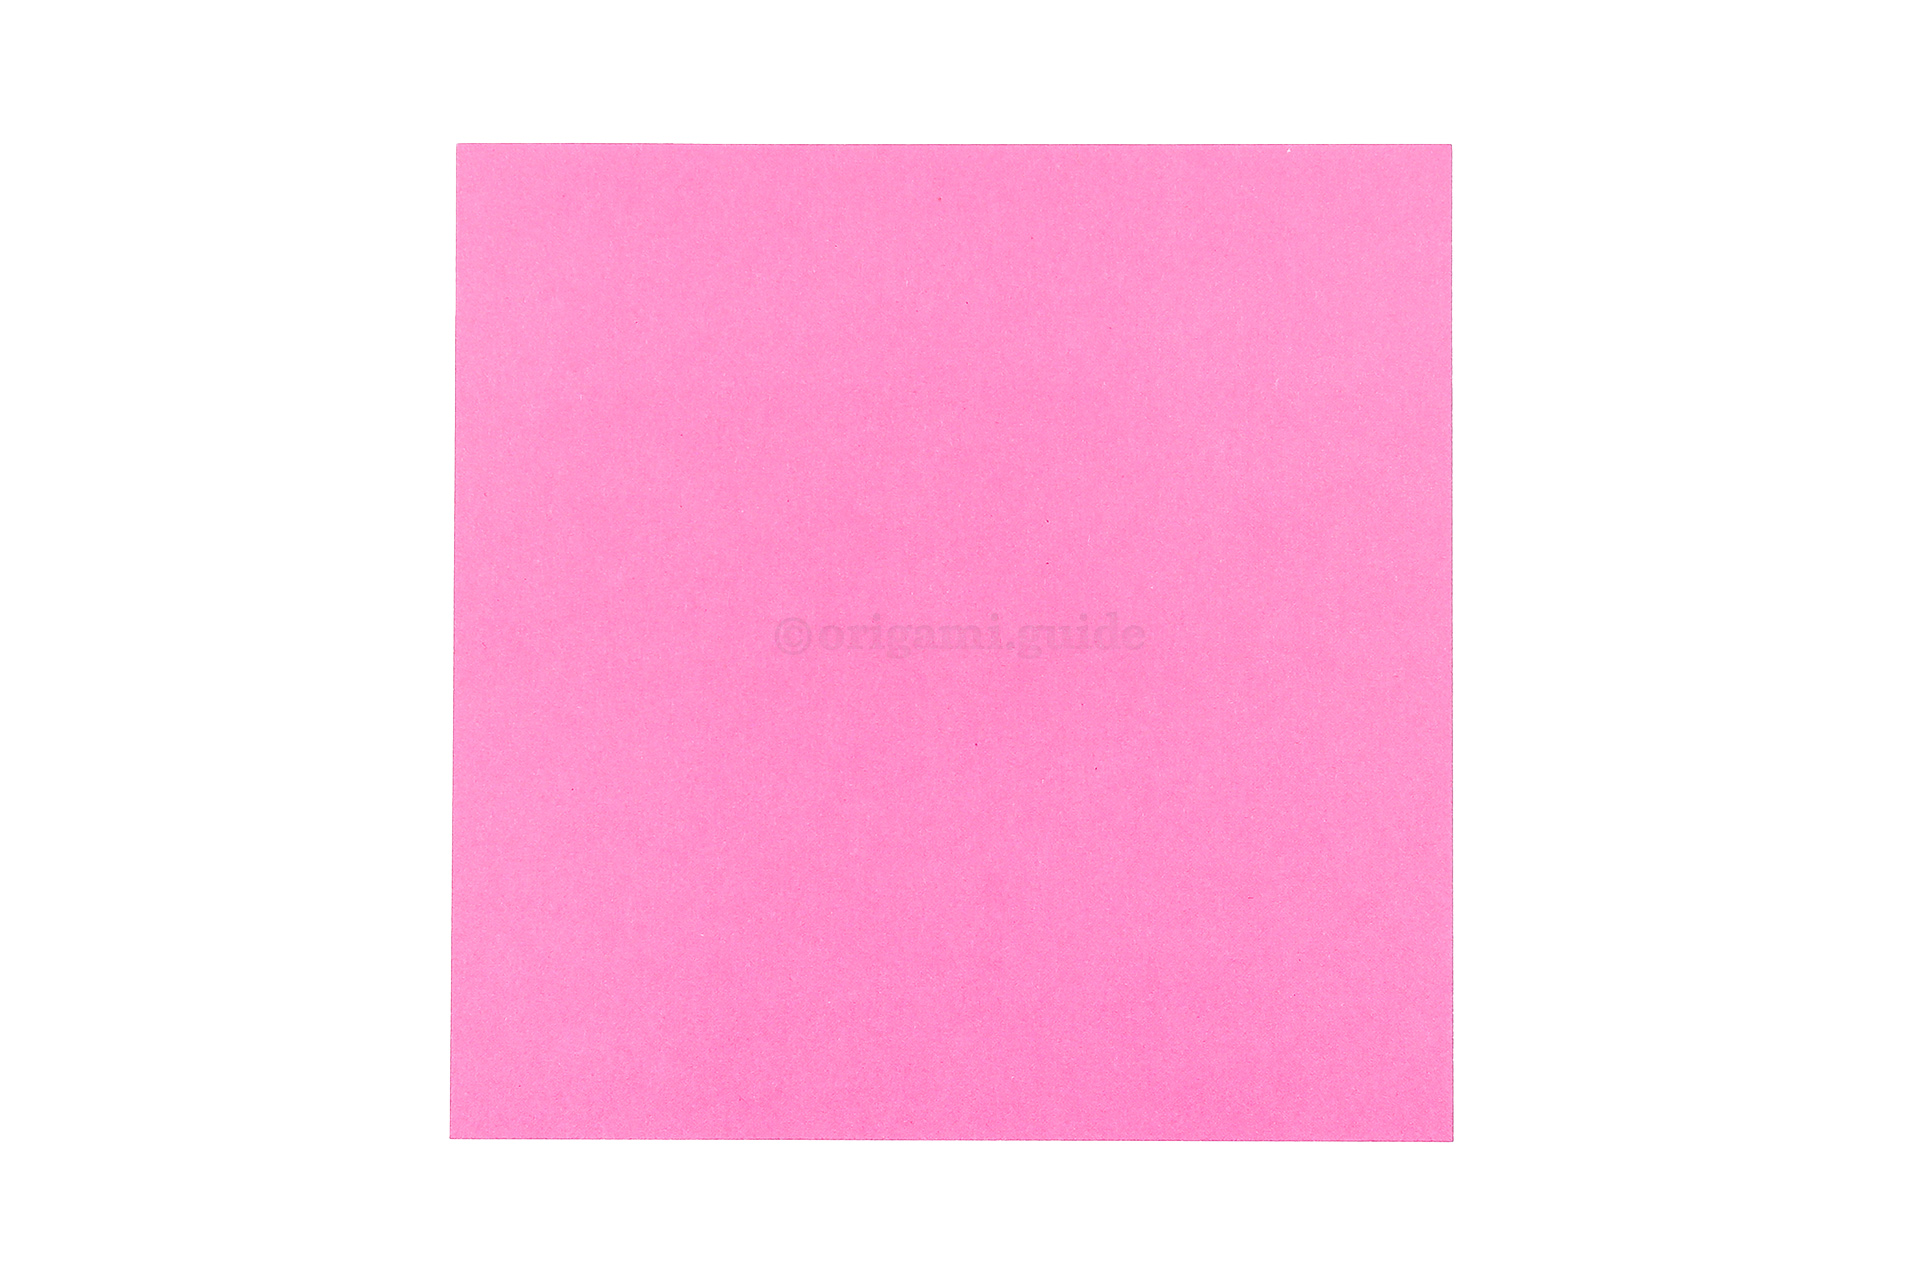 This is the front of our origami paper, the origami sleeping rabbit will be this colour at the end.